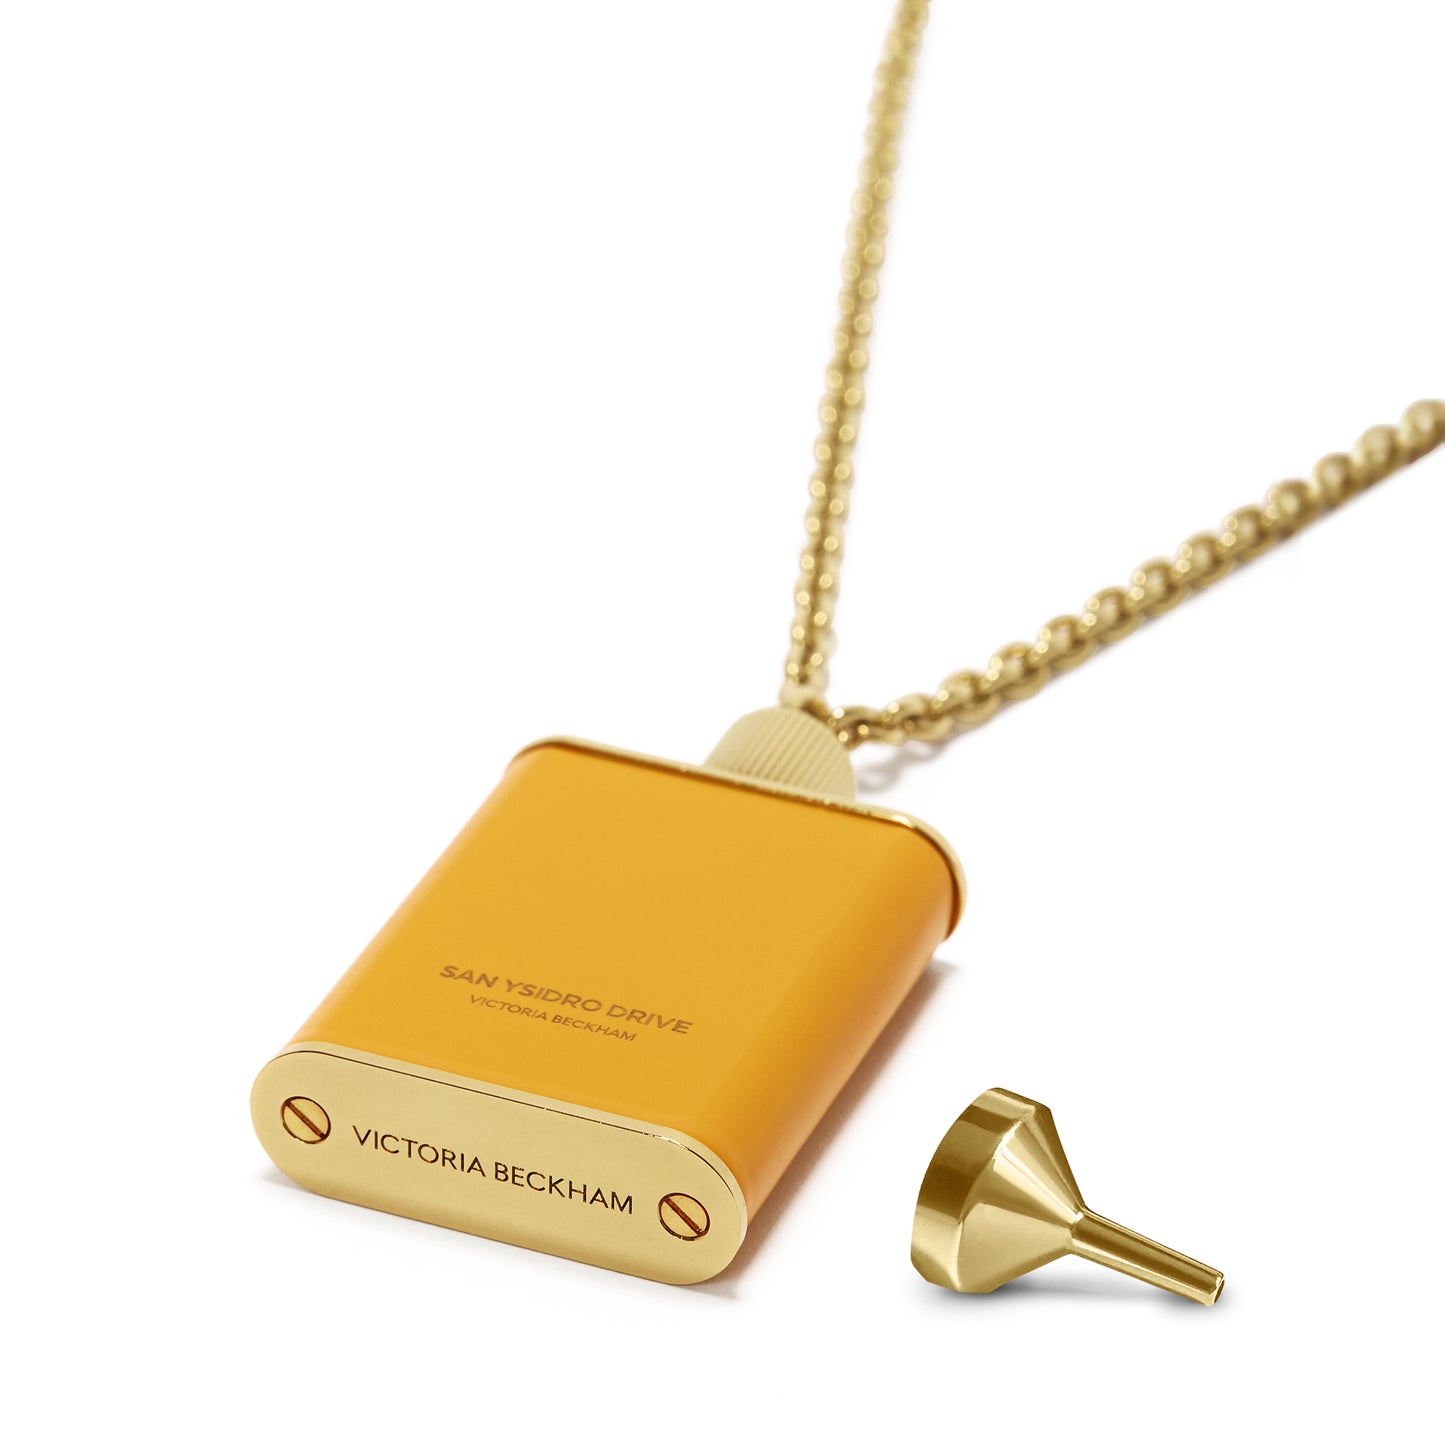 A gold brushed brass pendant on a chain features the label "San Ysidro Drive Victoria Beckham" and "Victoria Beckham" engraved. The Perfume Bottle Necklace In San Ysidro Drive by Victoria Beckham is placed beside it.